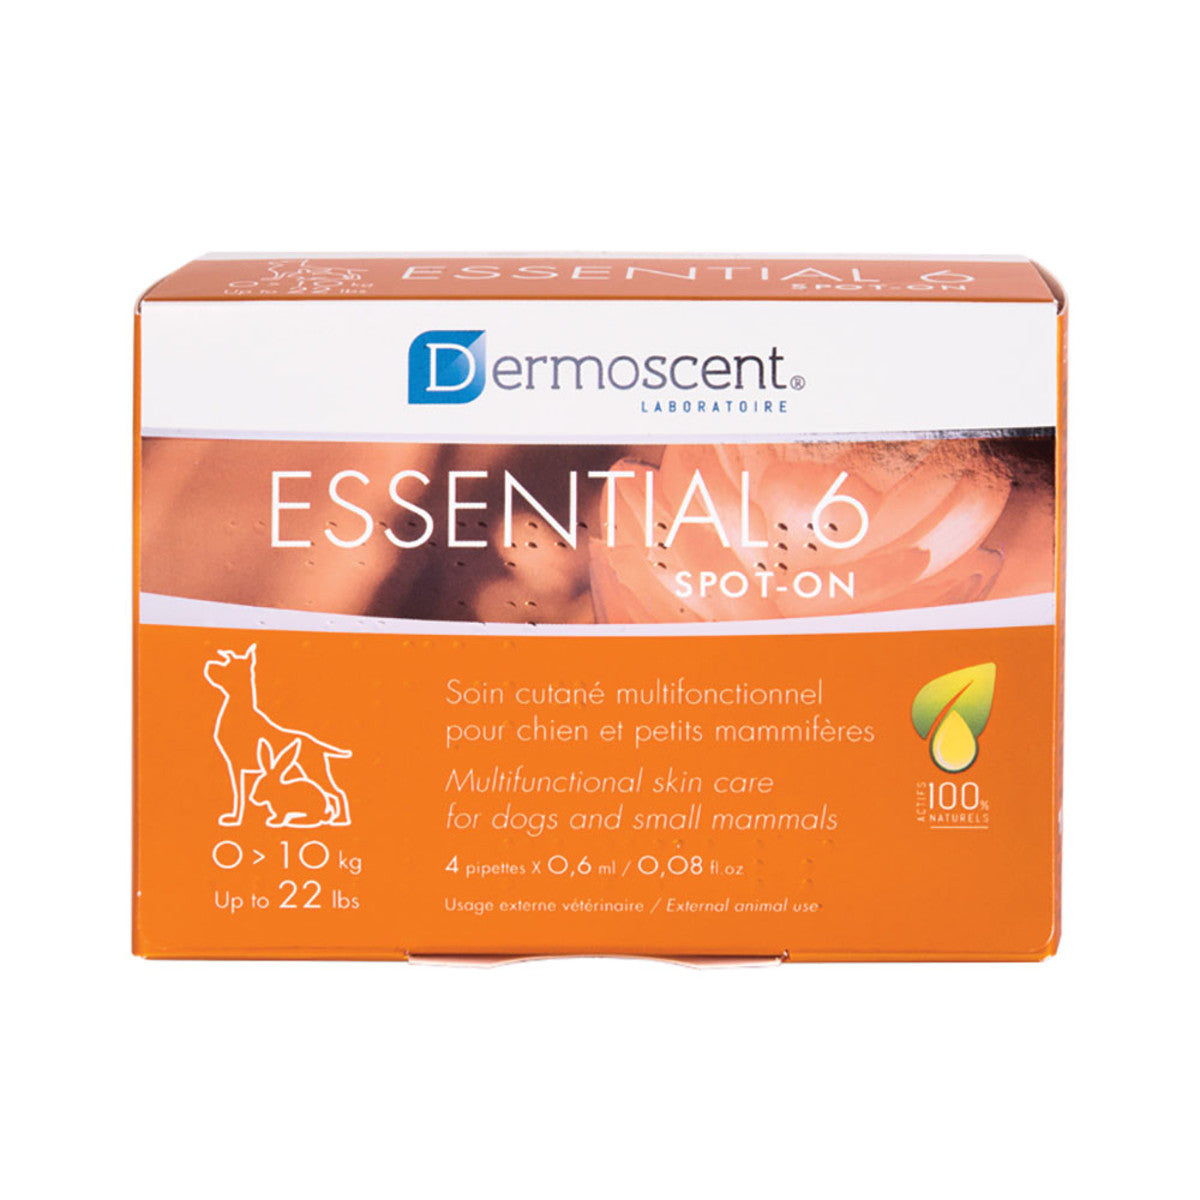 PAW Essential6 SpotOnCare Dogs Small (0 10kg) 0.6ml x4 pip